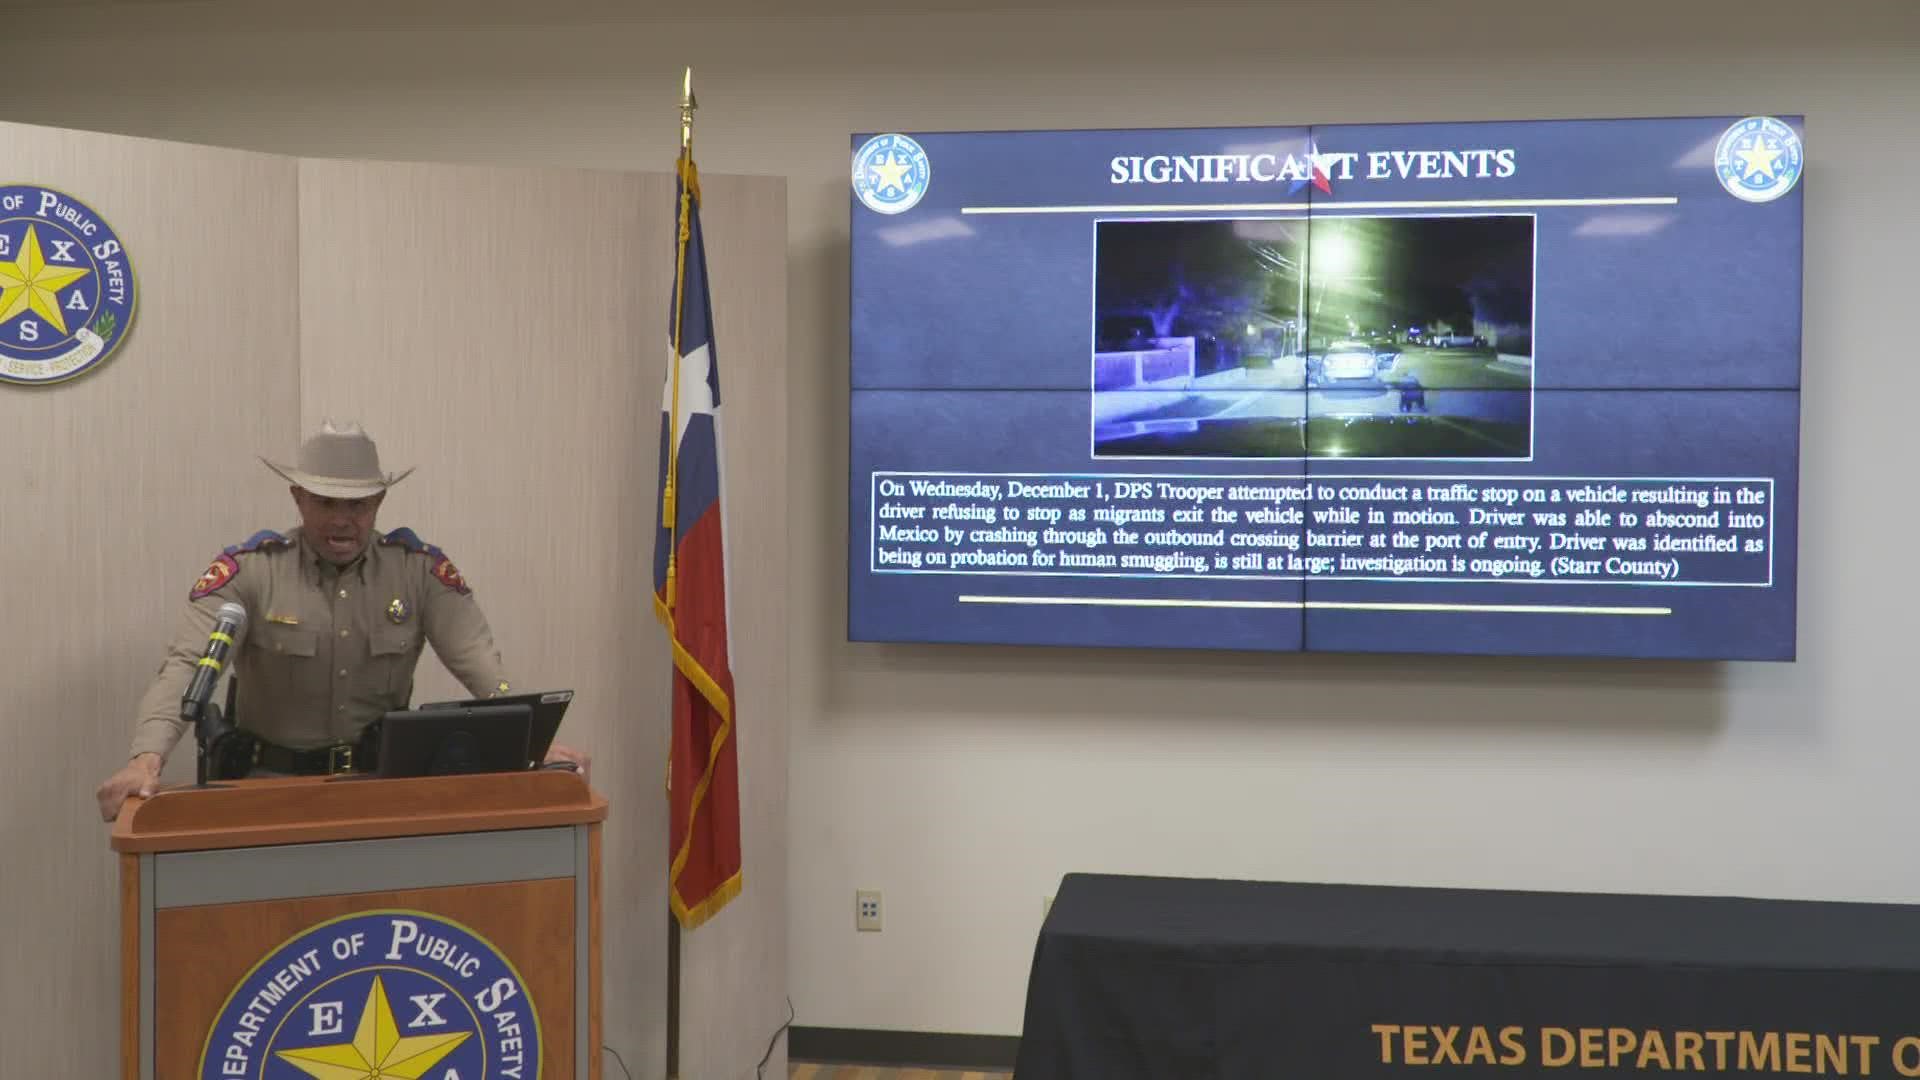 DPS troopers describe recent events as part of Operation Lone Star and border security efforts.